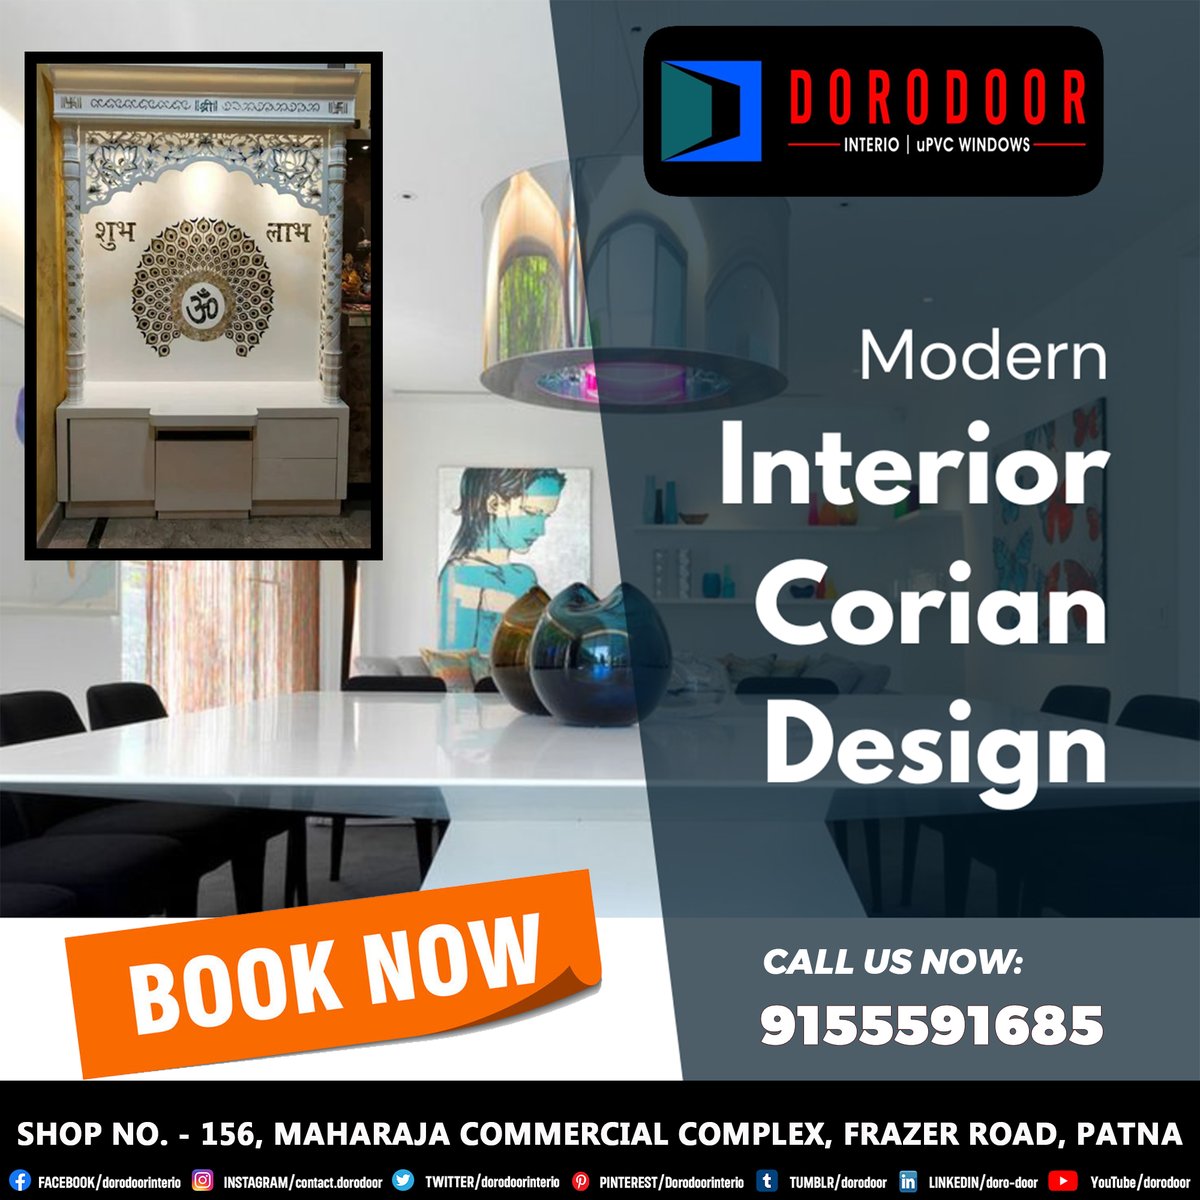 ✨ Dorodoor: Where Corian Dreams Shine! ✨ Elevate your home with our exquisite Corian interiors and temples. Craftsmanship at its finest! 🏡✨ #Dorodoor #CorianDesigns #InteriorInspiration #Craftsmanship #ElegantSpaces #BespokeBeauty #DesignExcellence #CorianTemple